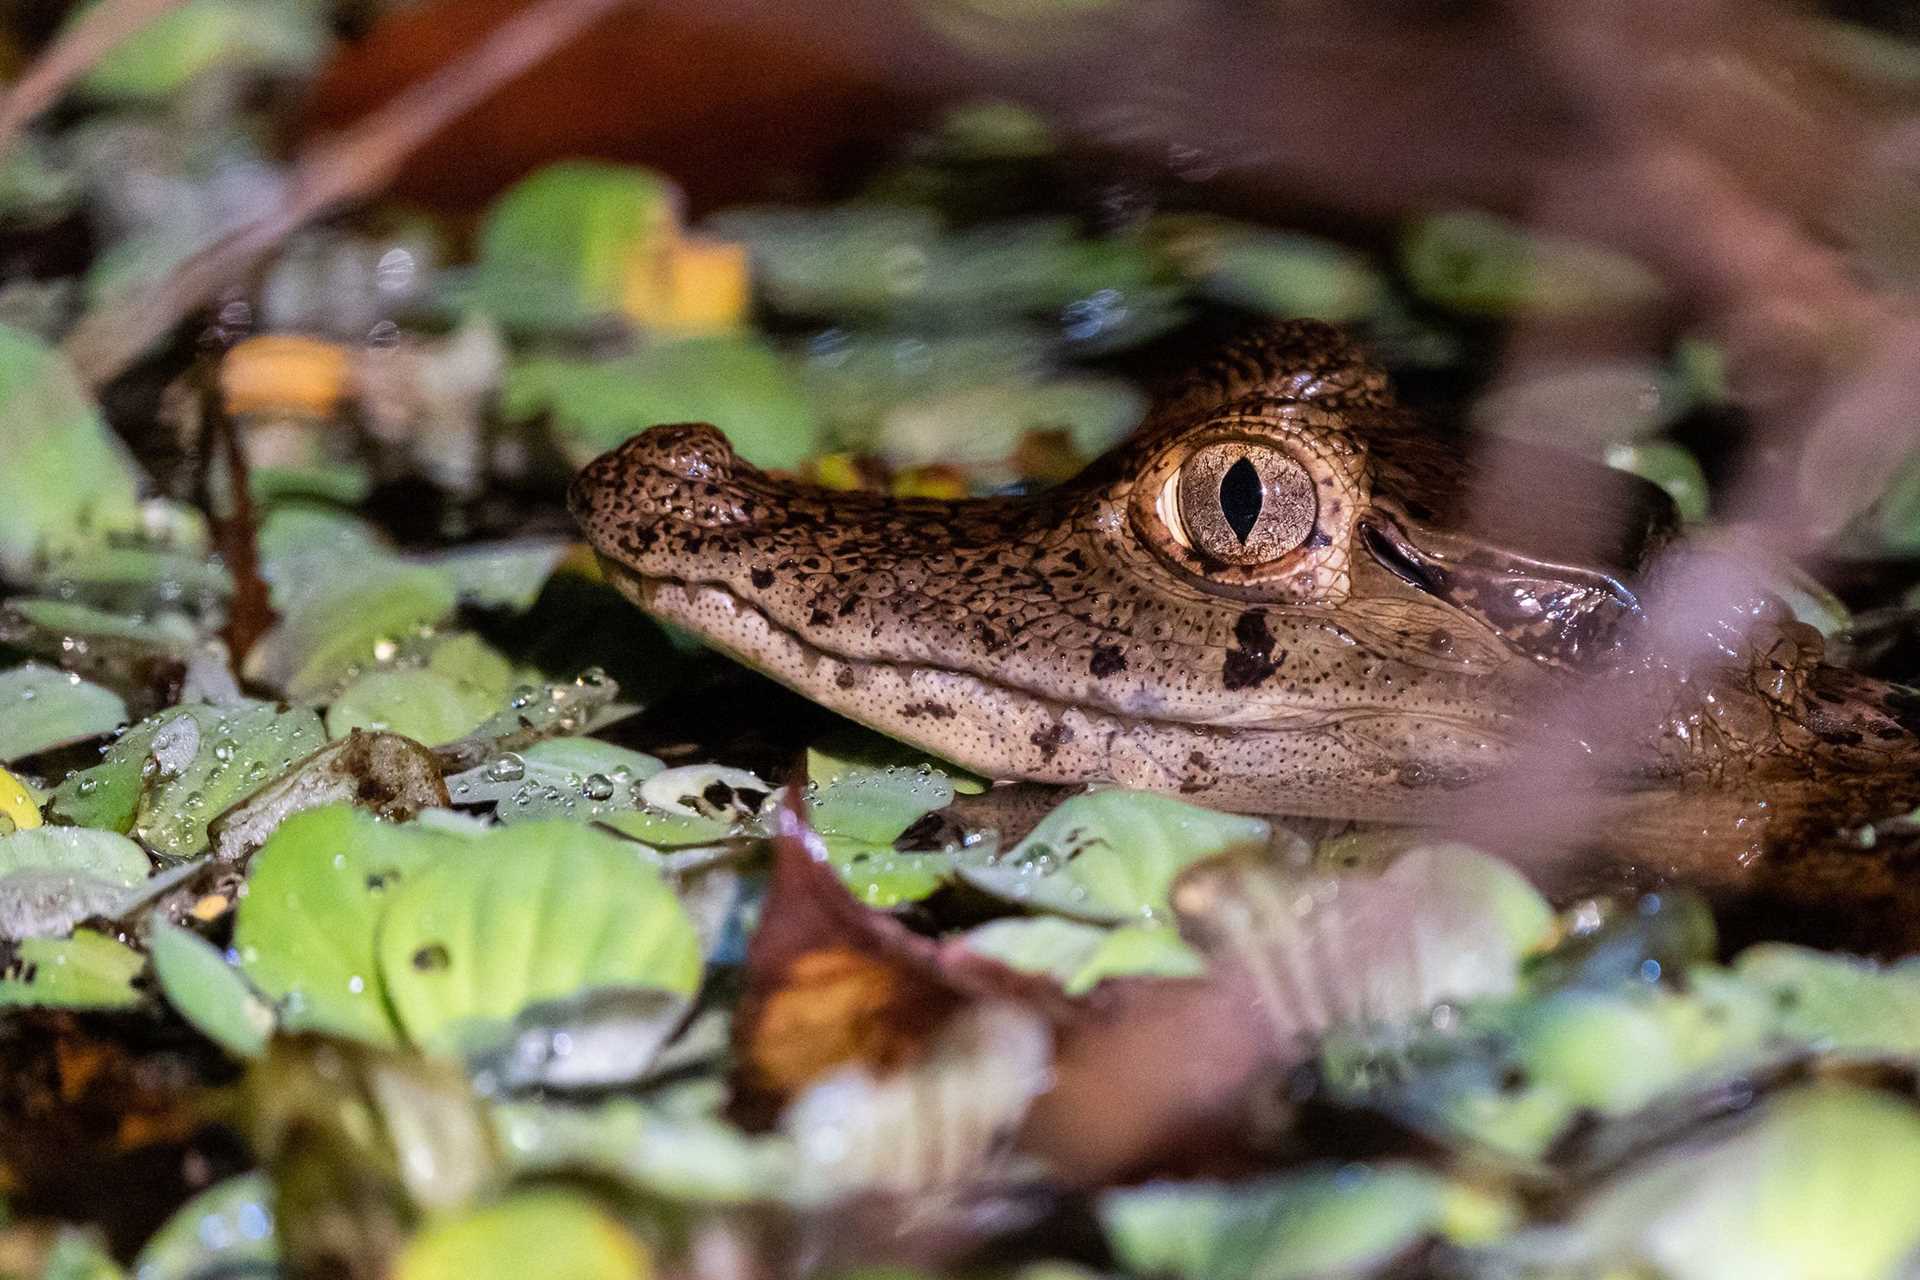 small caiman head poking out of water